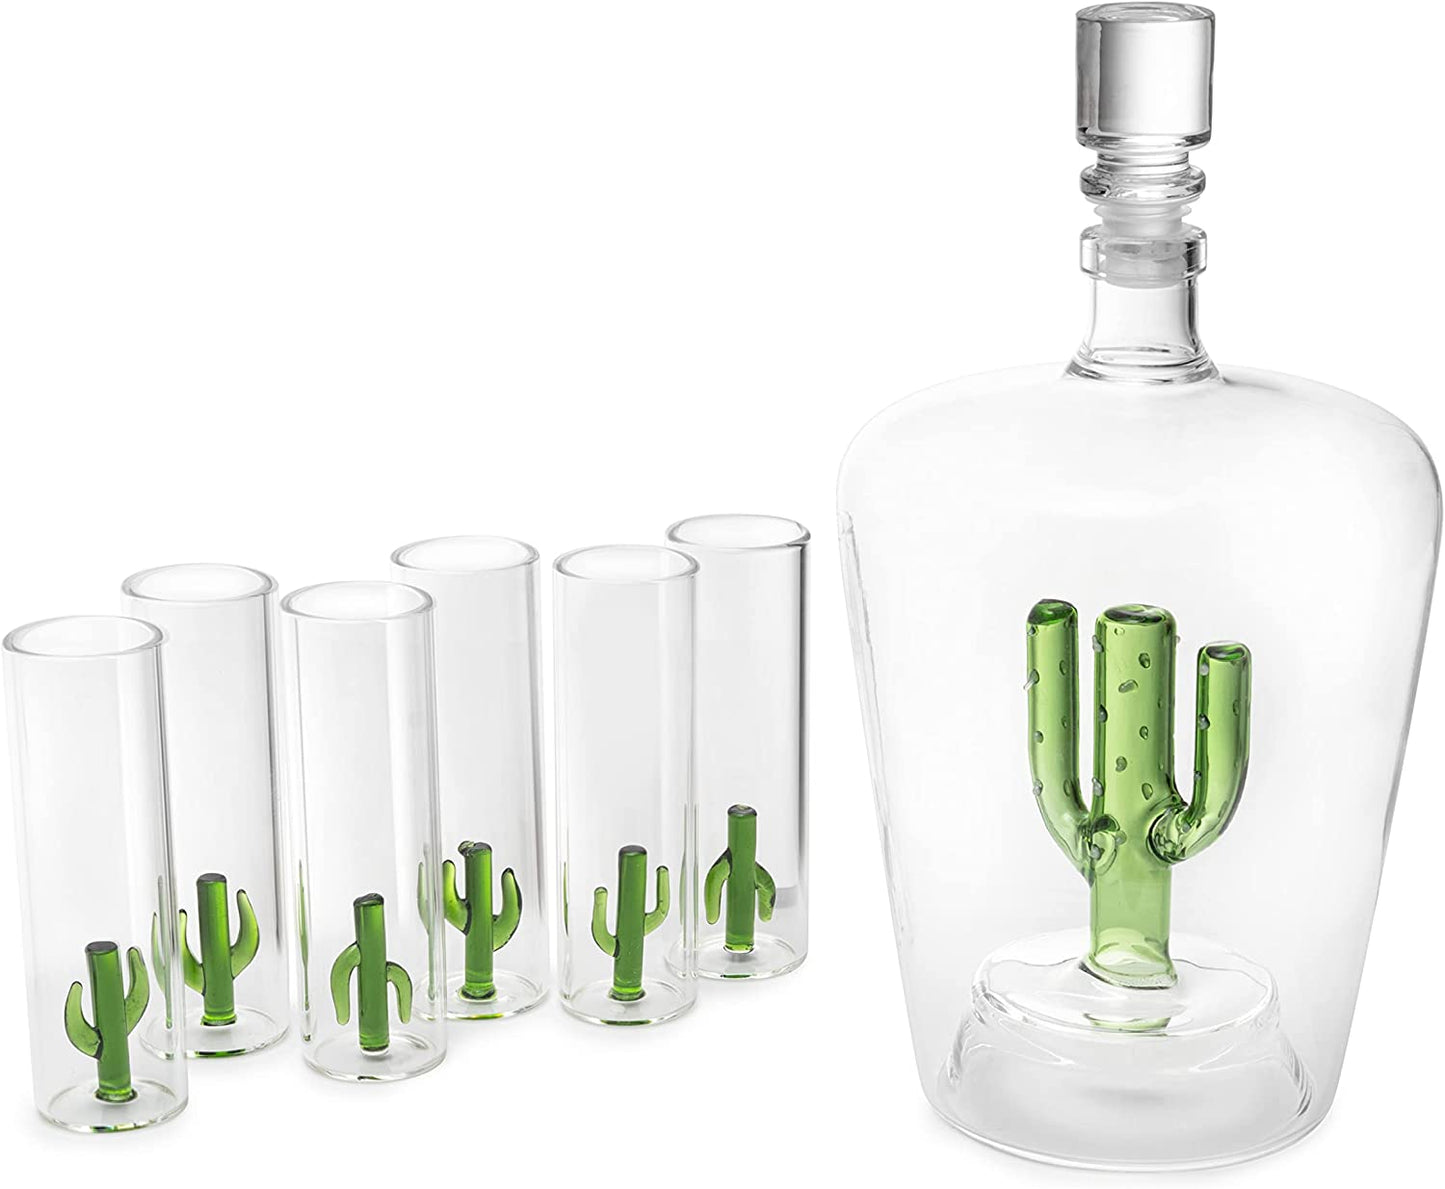 Tequila Decanter Set With Agave Decanter and 6 Agave Shot Glasses, Perfect For Any Bar Or Tequila Party, 25 Ounce Bottle, 3 Ounce Tequila Shot Glasses (Cactus Tequila Set)-2